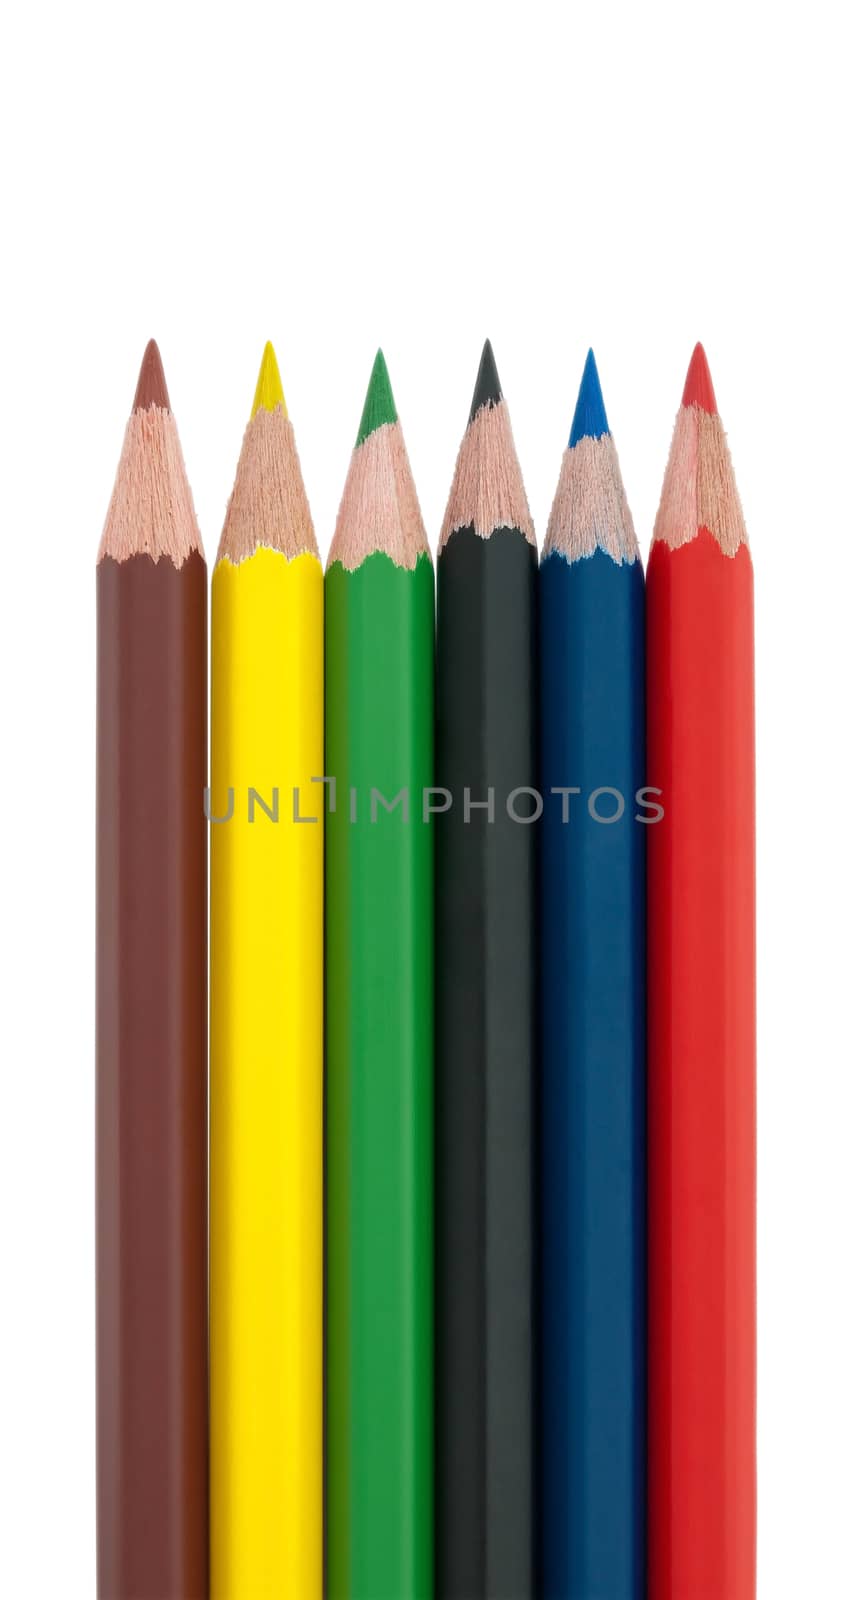 Six wooden color pencils isolated on white background. Clipping path included.